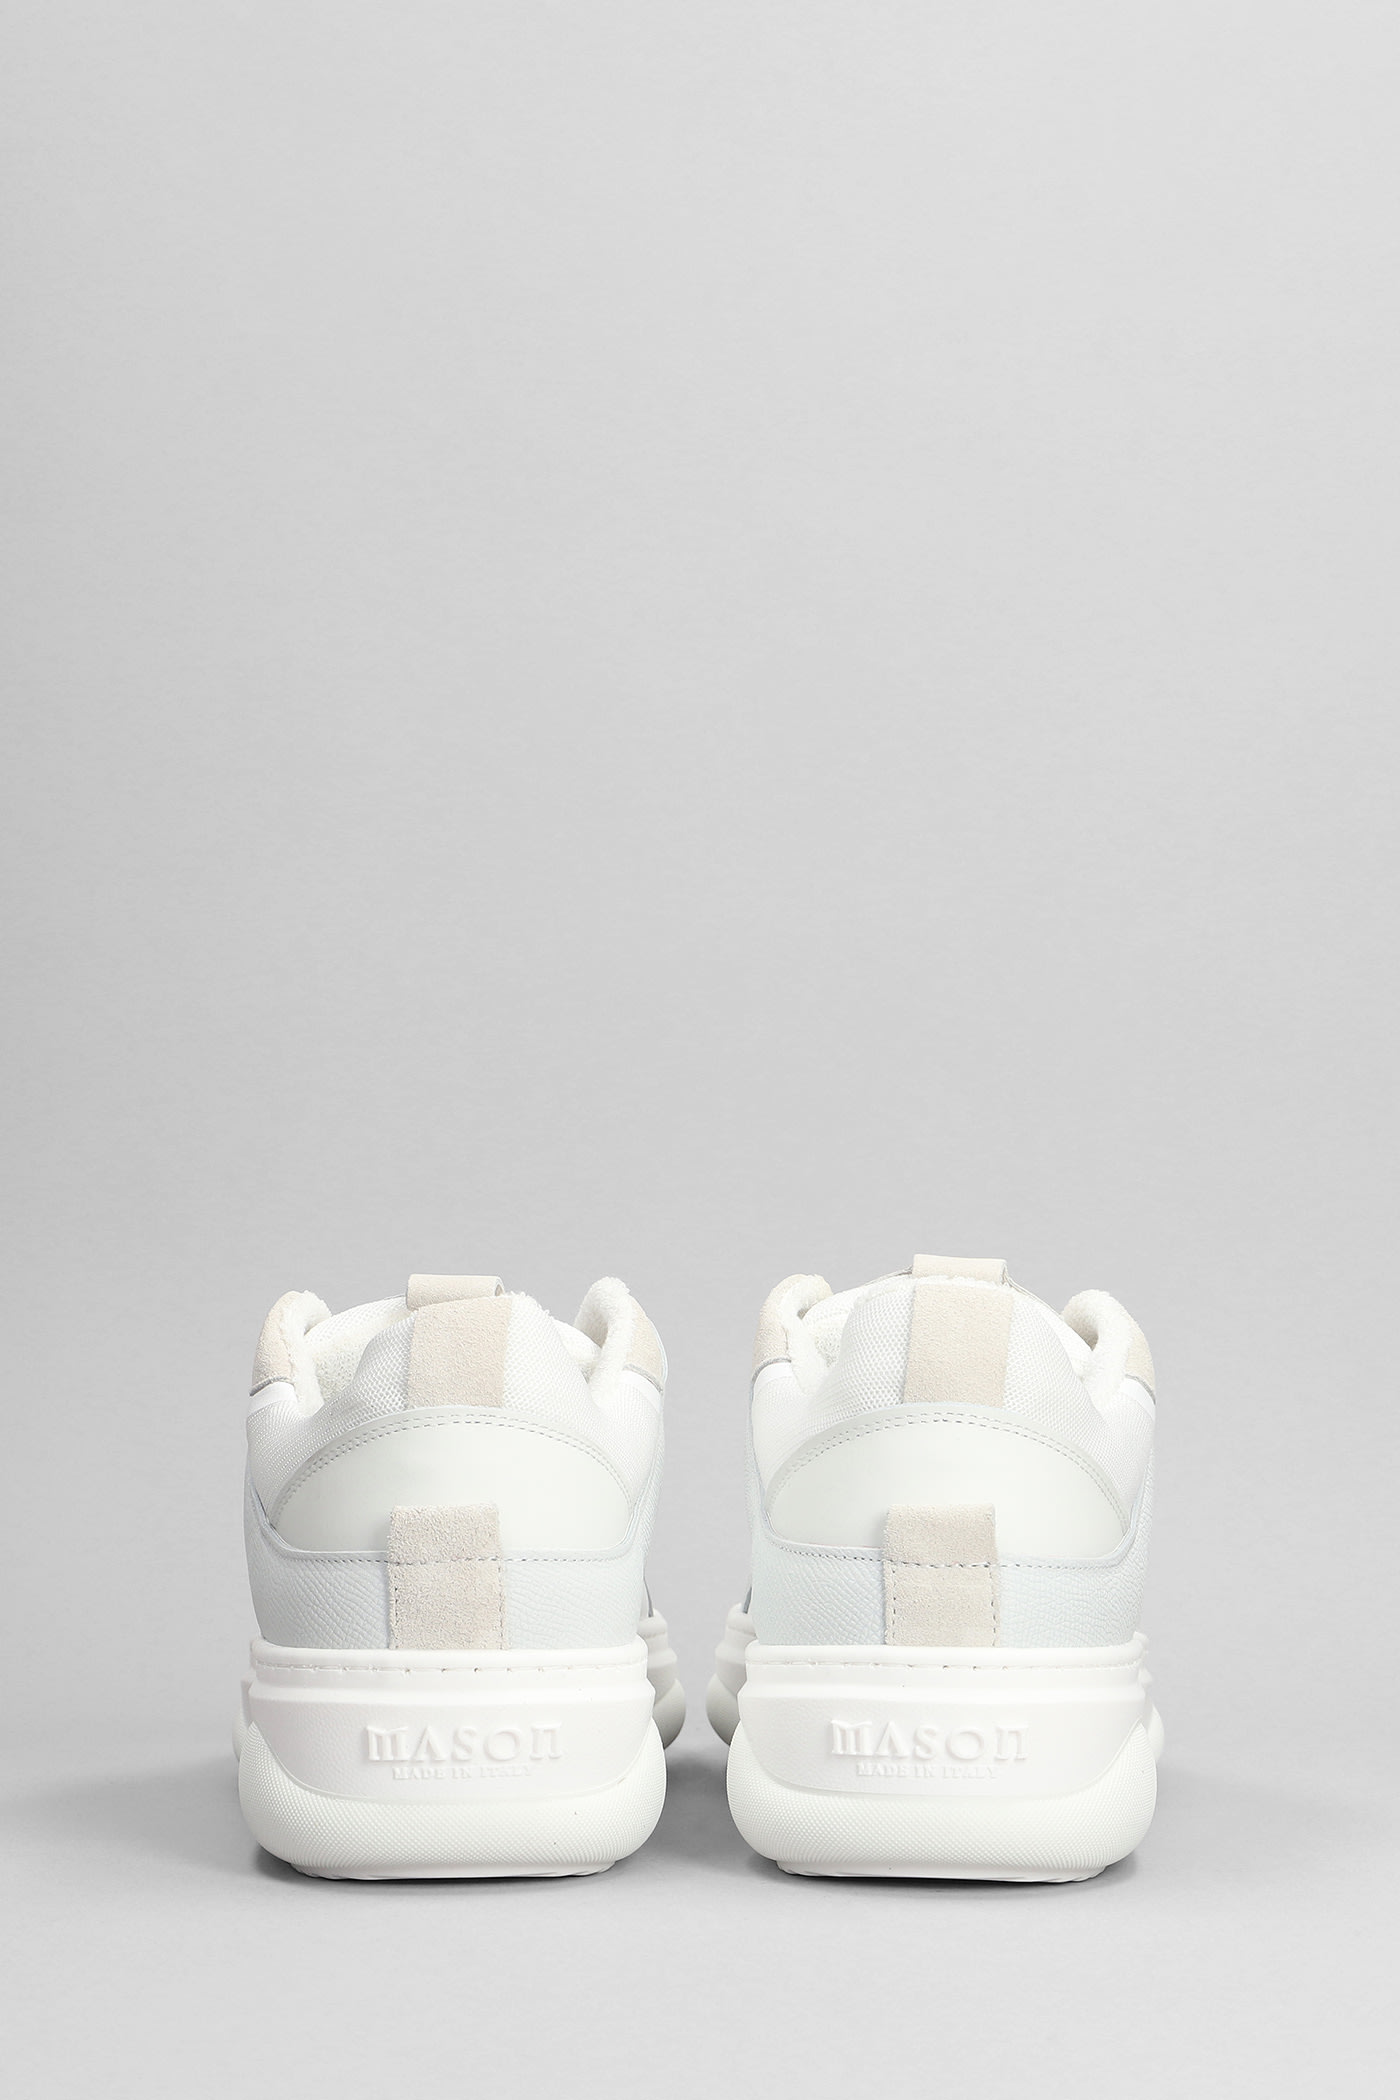 Shop Mason Garments Venice Sneakers In White Suede And Fabric